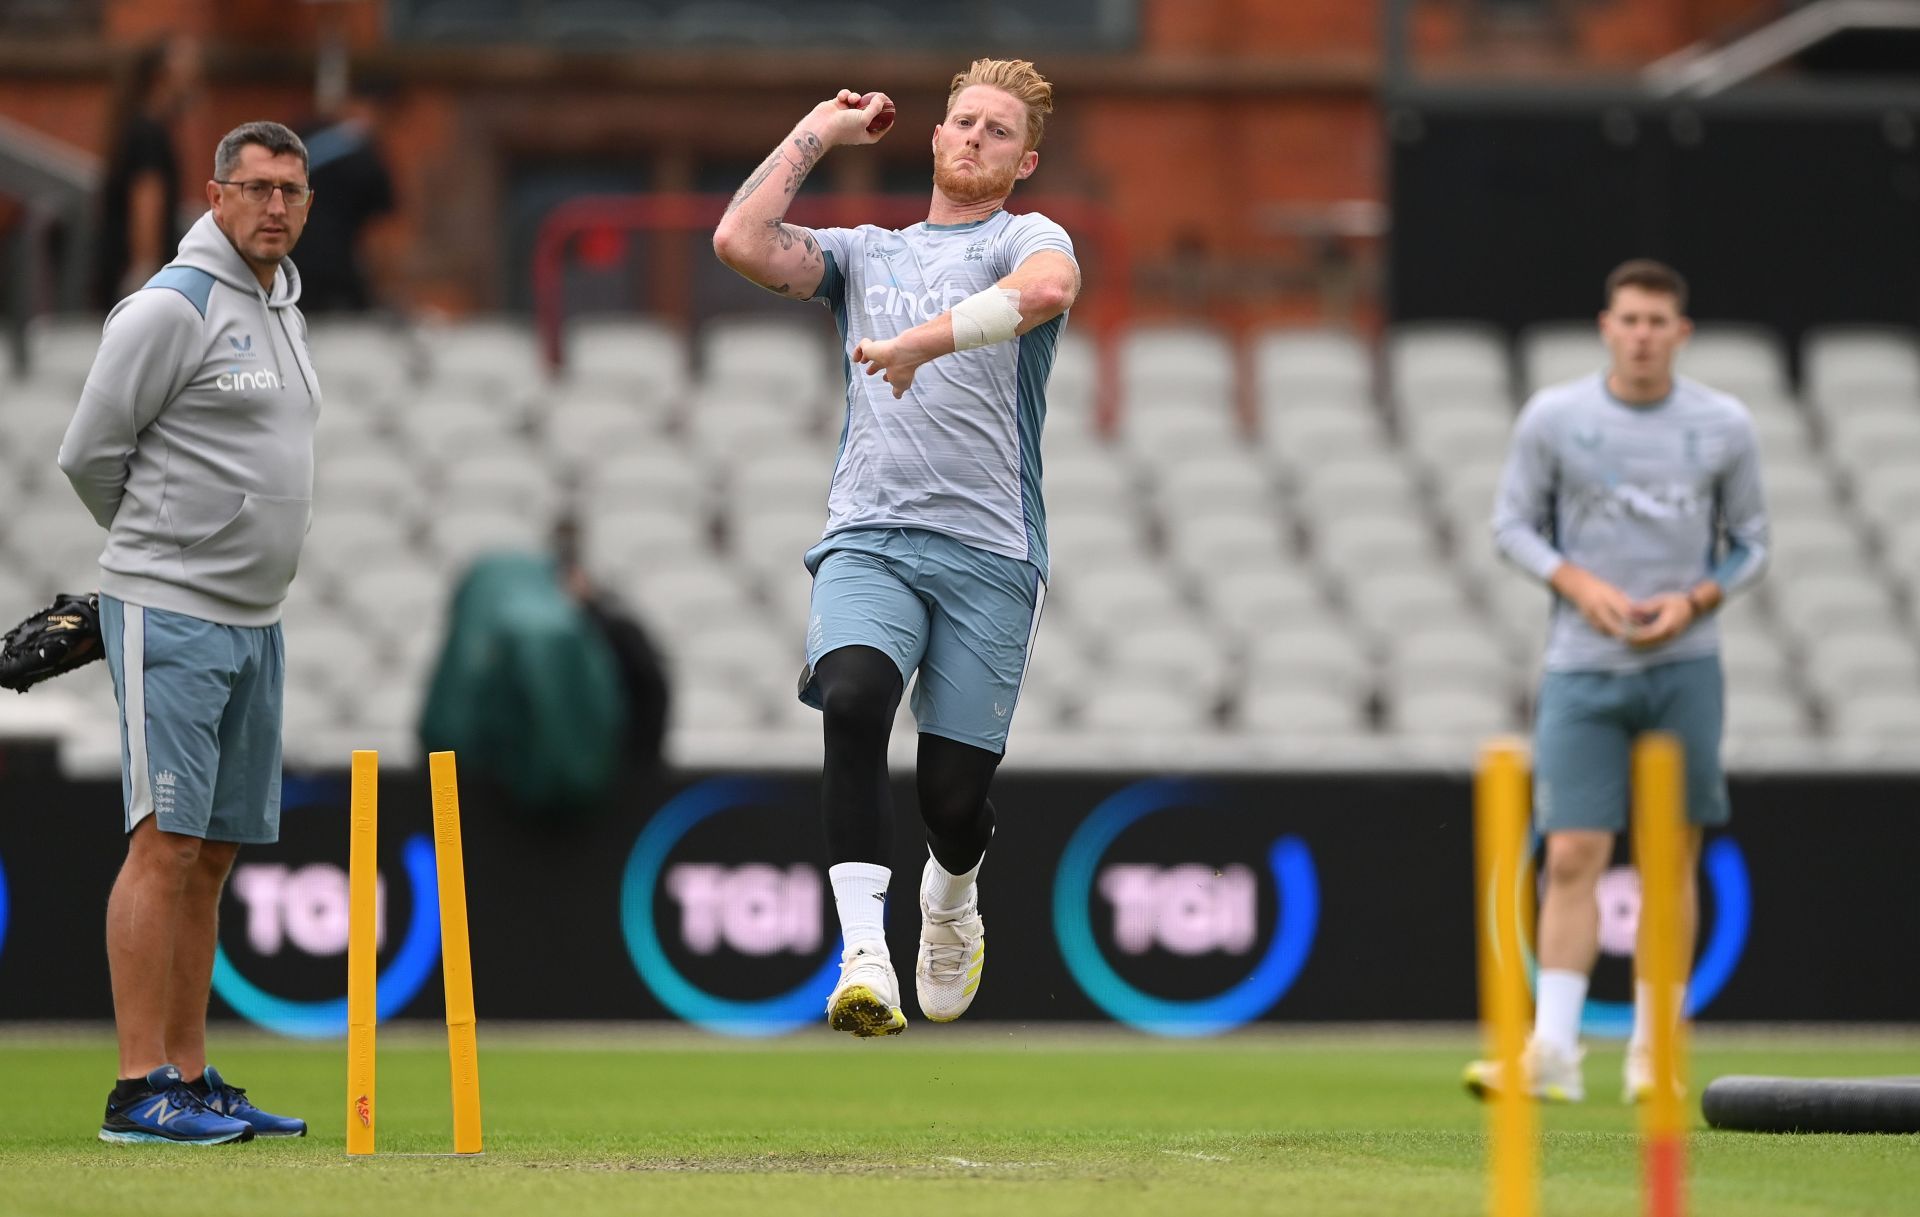 Ben Stokes named a solitary change to the playing XI from Lord